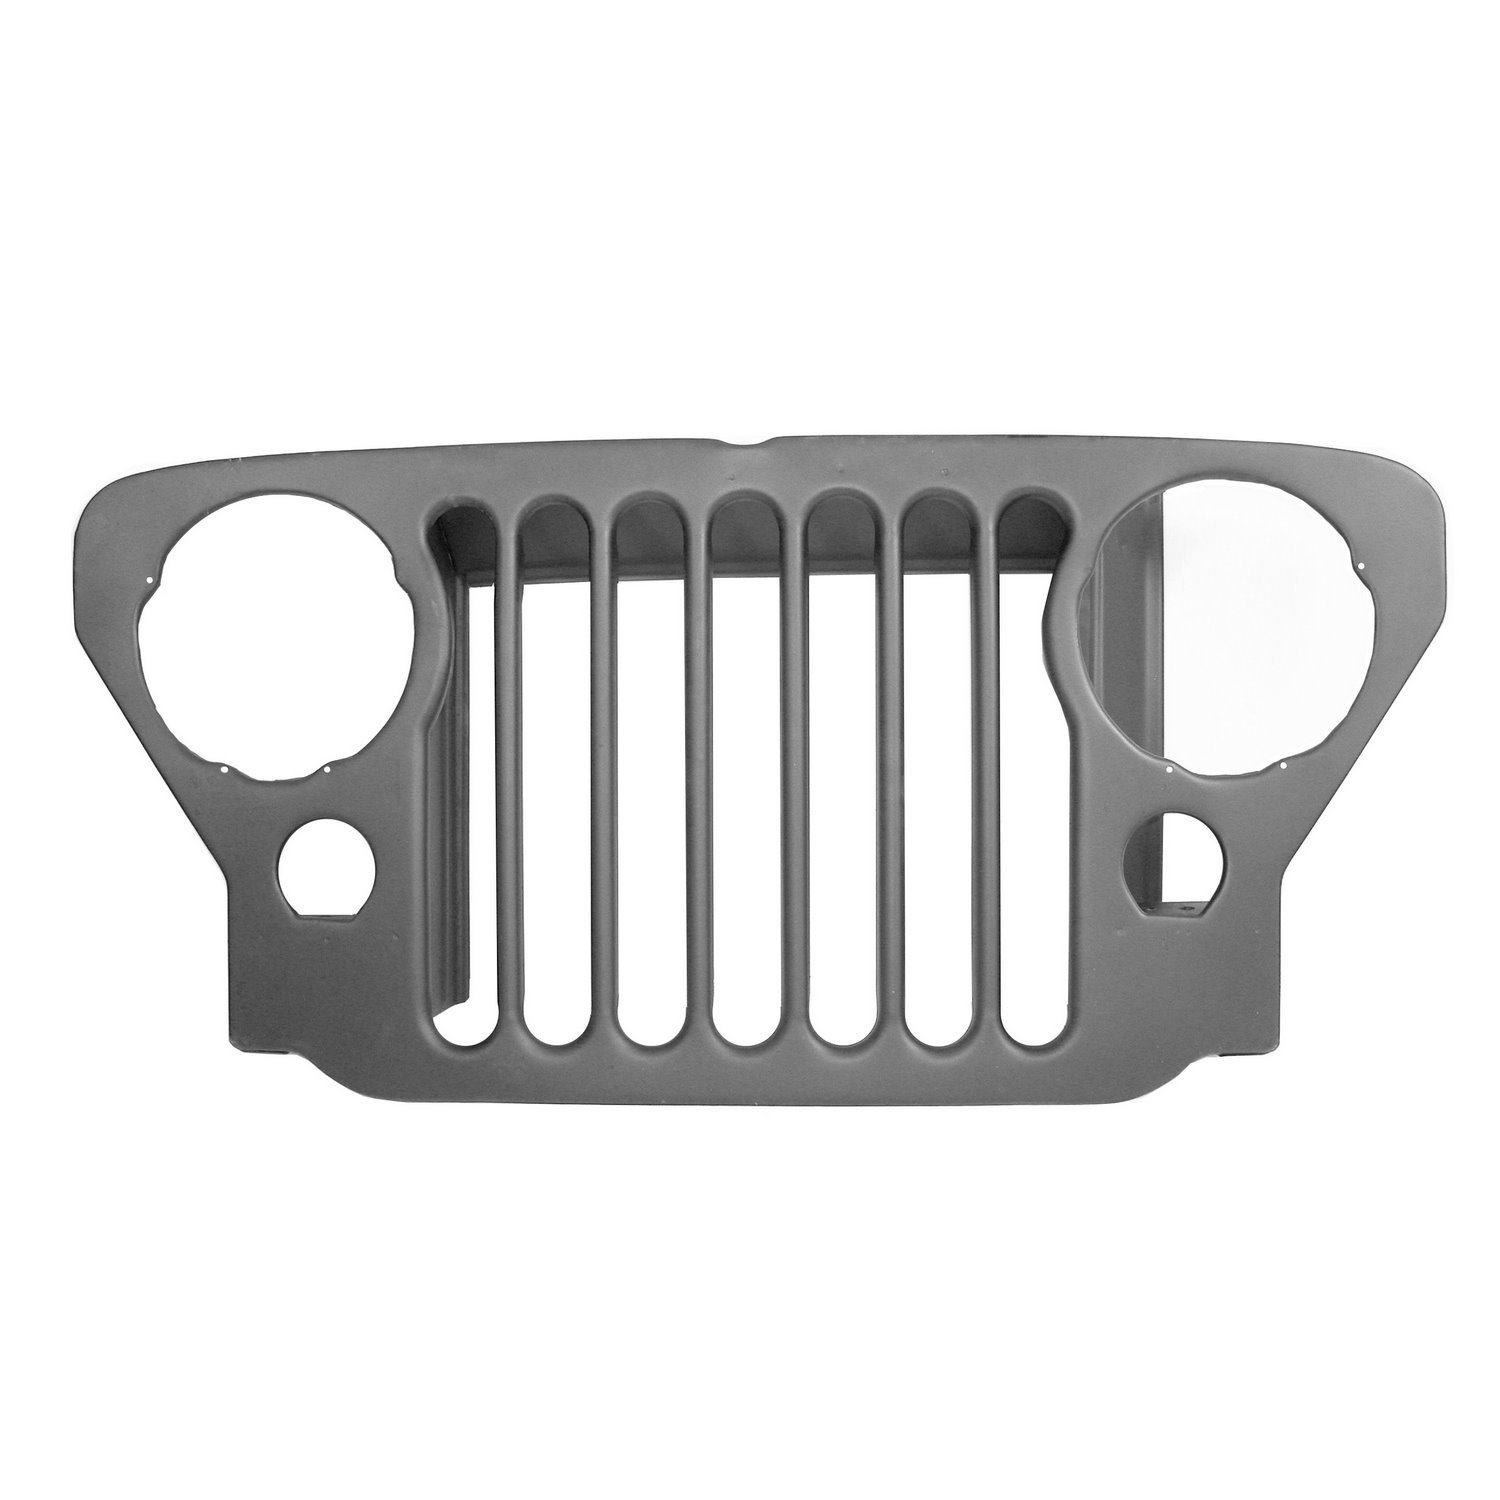 Steel replacement grille from Omix-ADA, Fits late 1945 to 1946 Willys CJ2A.